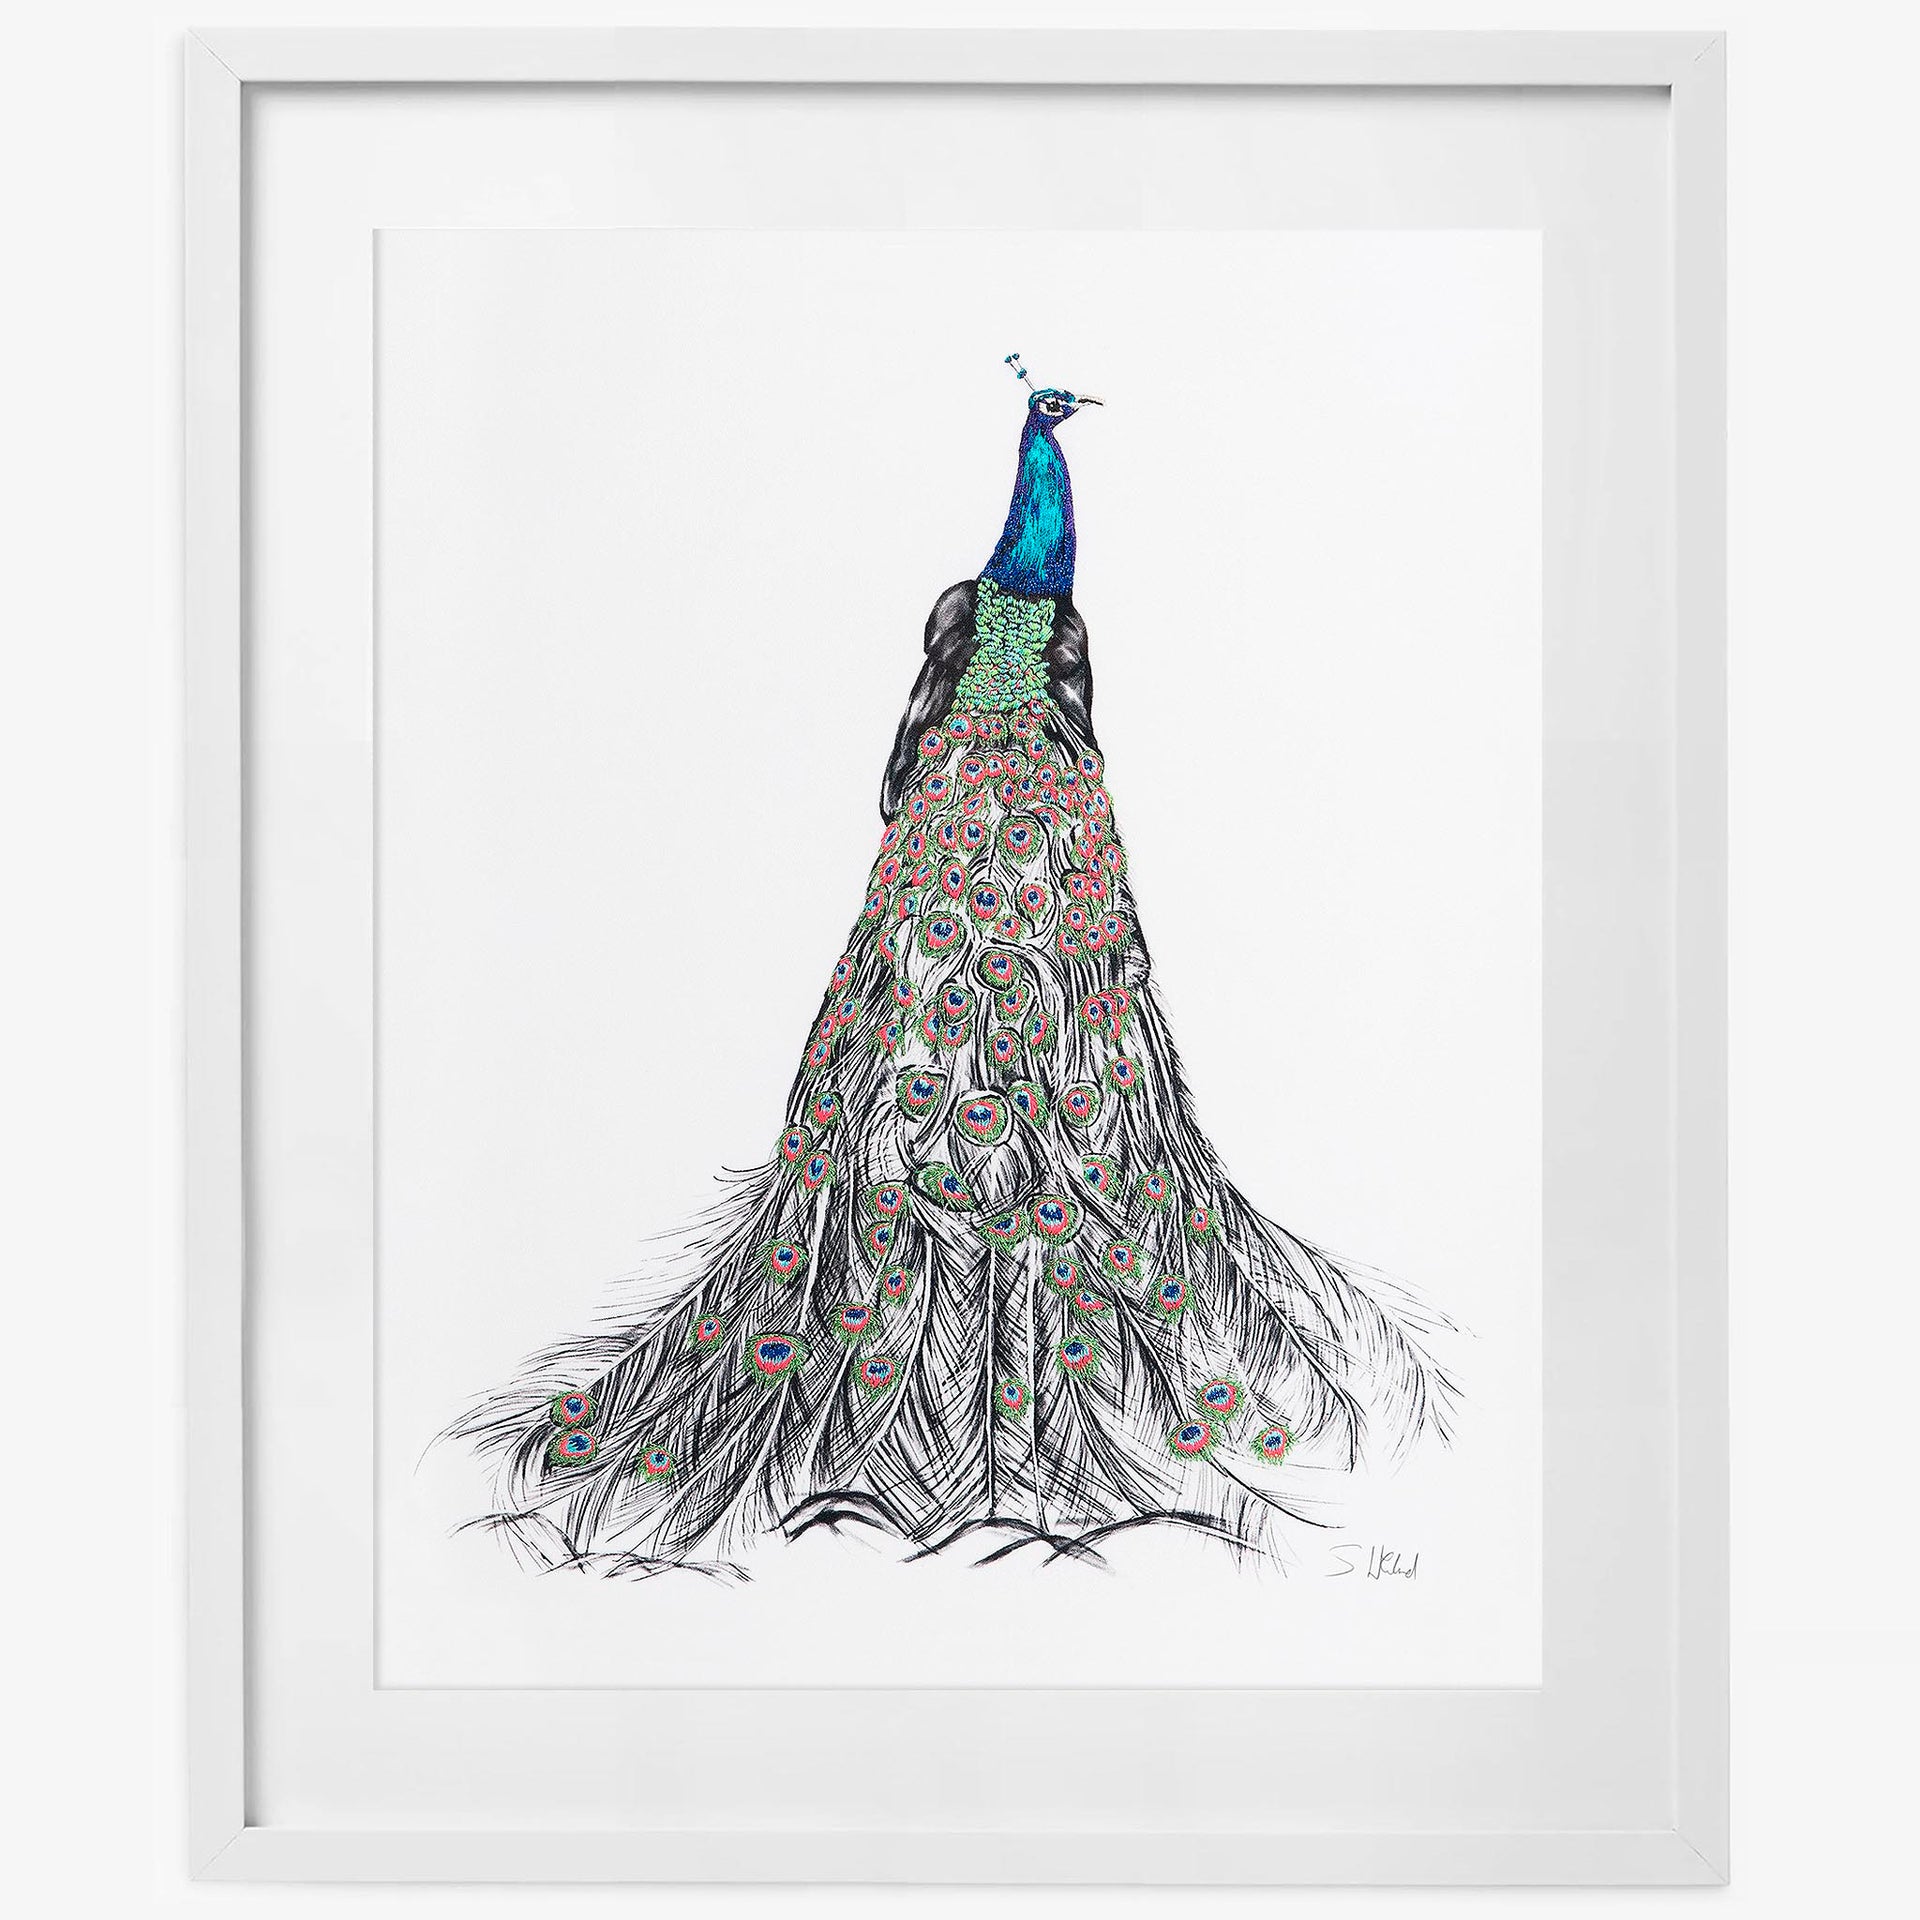 Peacock hand embroidered limited edition print in white frame